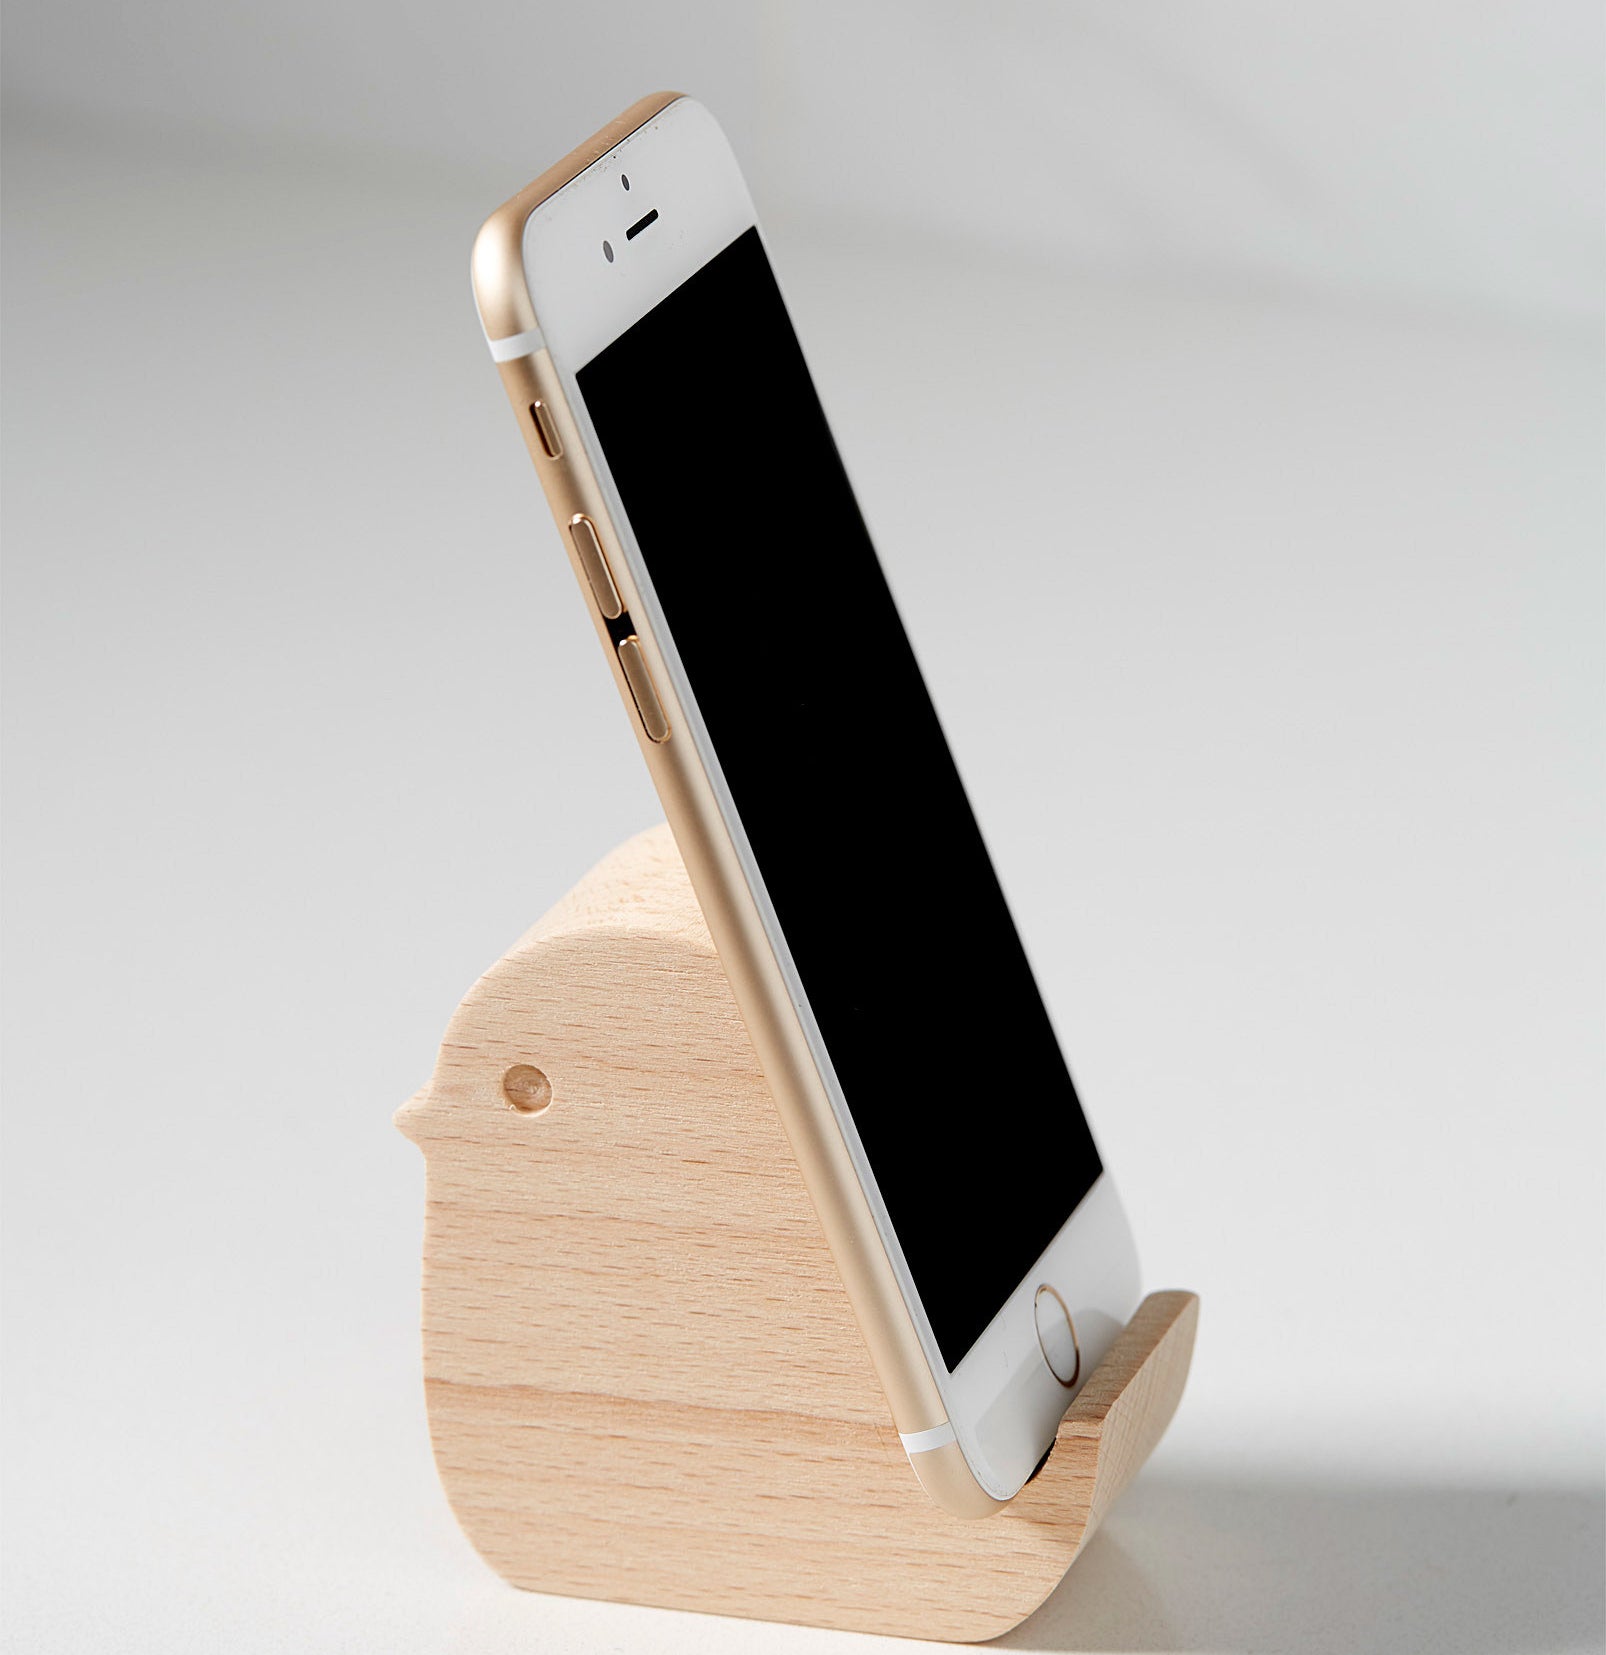 A wooden phone holder in the shape of a small bird